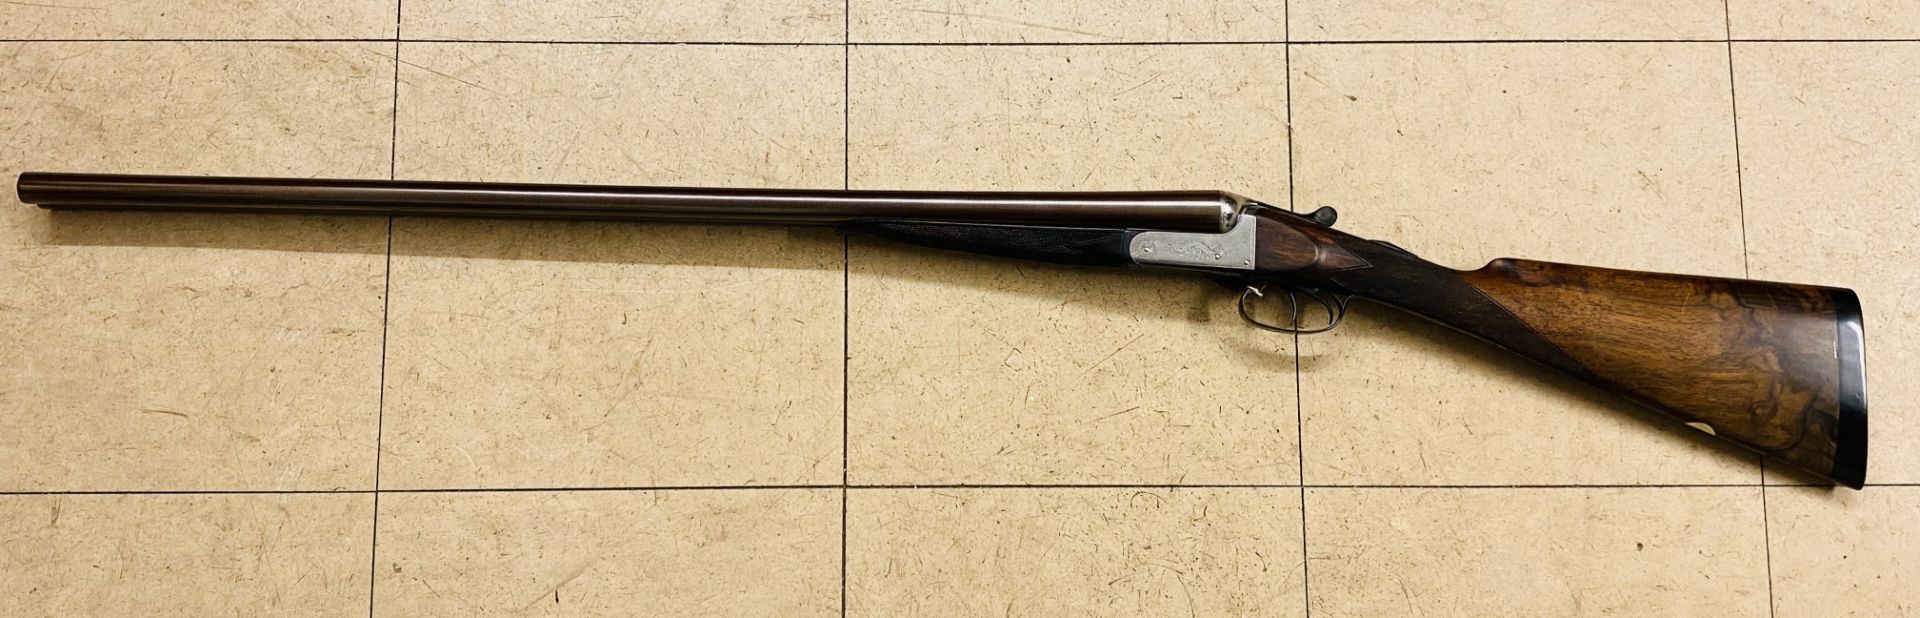 Gregson 12 bore side by side shotgun with 'Damascus' barrels.